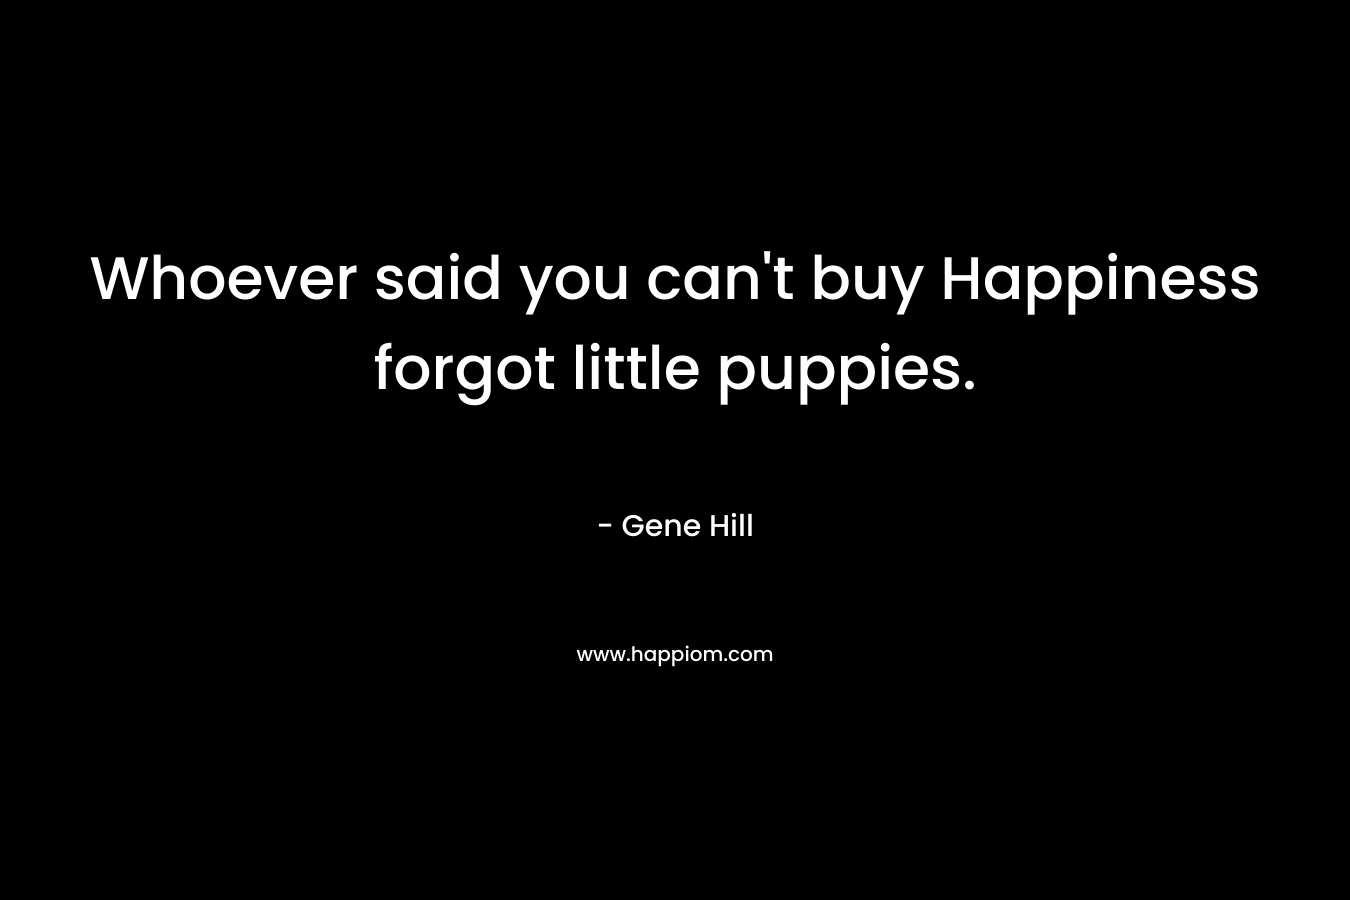 Whoever said you can’t buy Happiness forgot little puppies. – Gene Hill